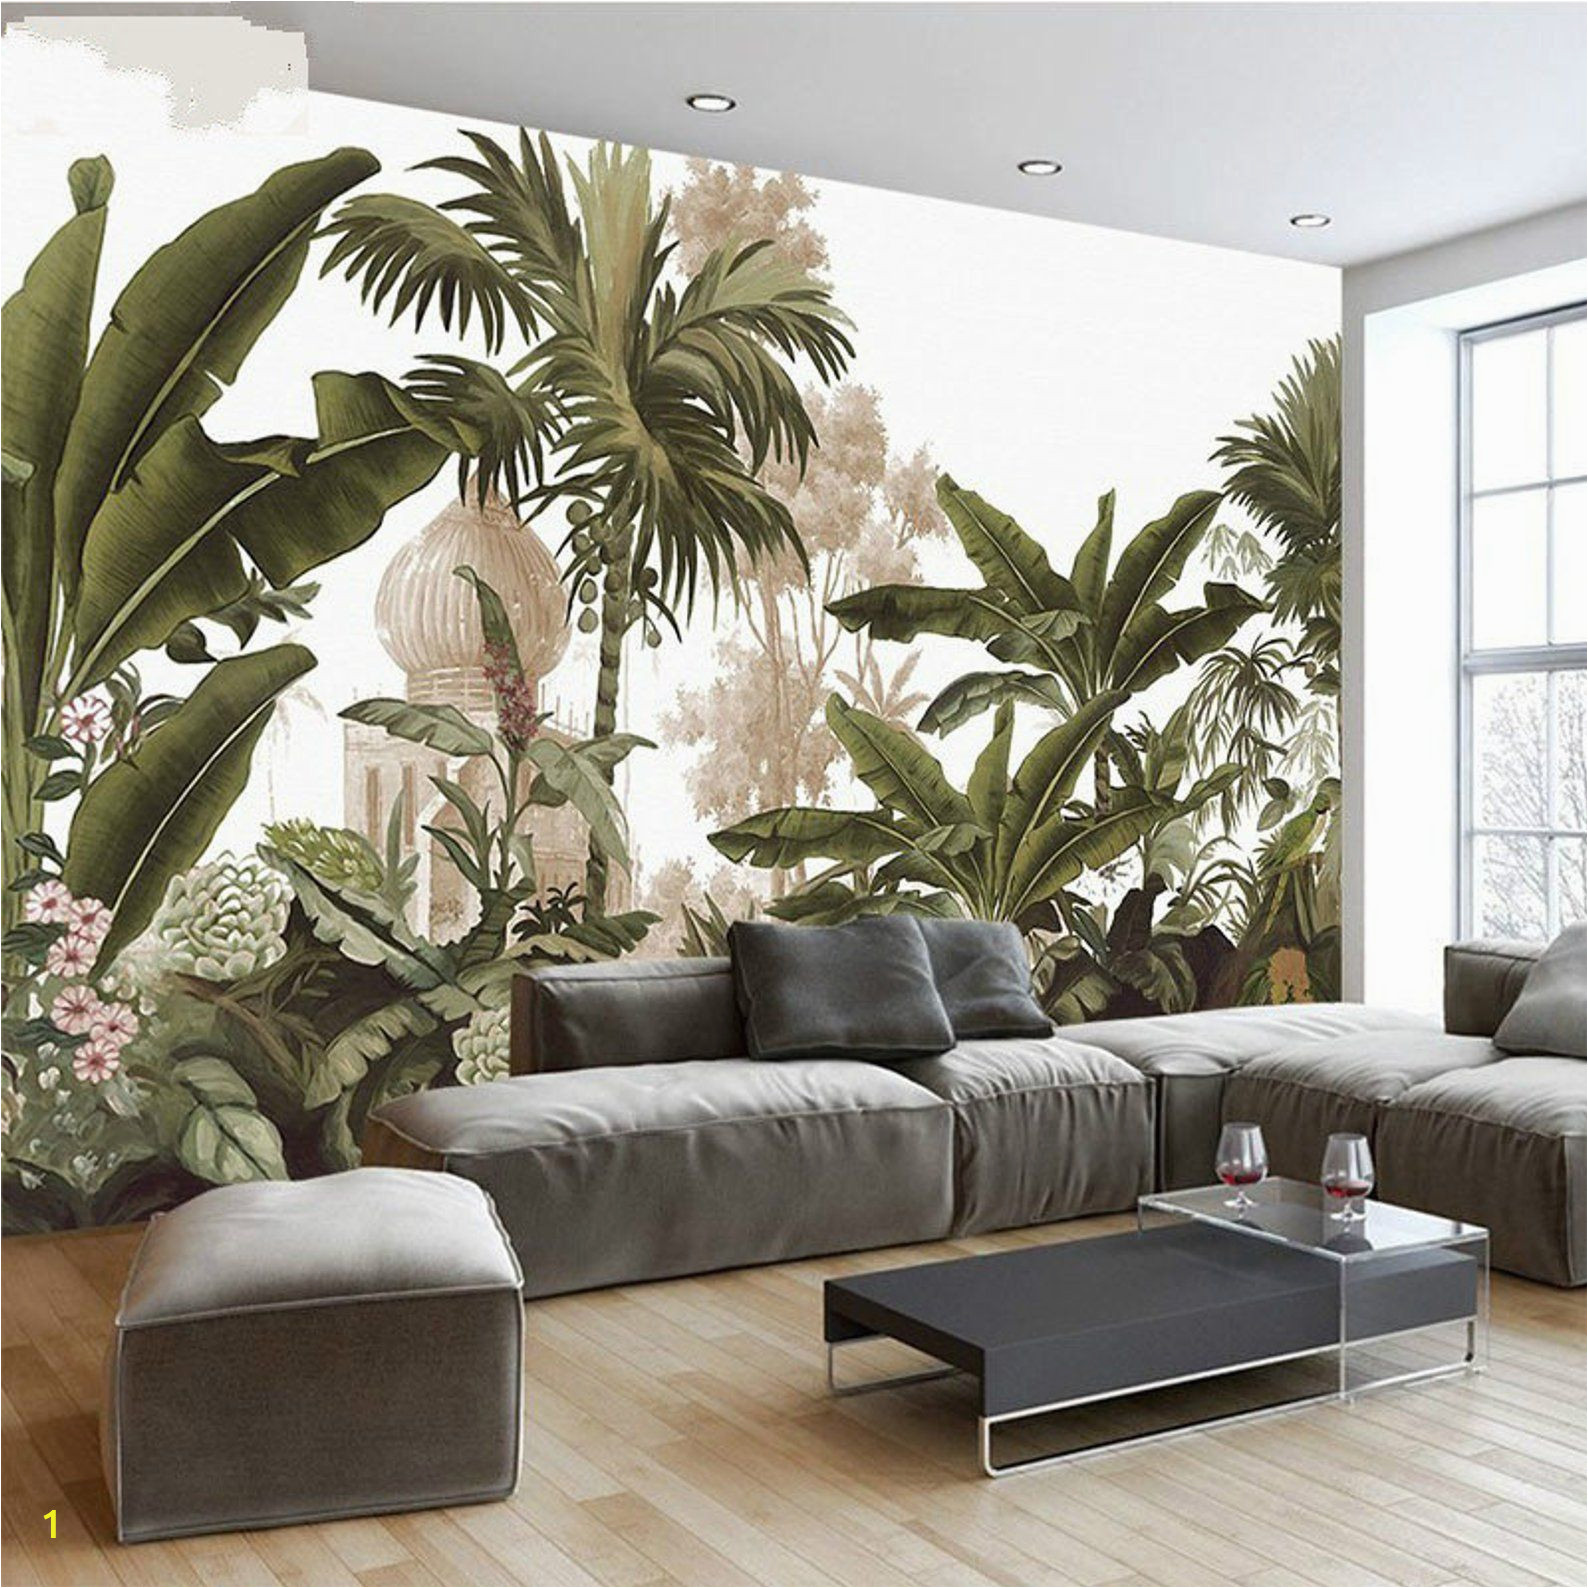 How to Paint A Wall Mural Tree Hand Painted Tropical Rainforest forest Wallpaper Wall Mural